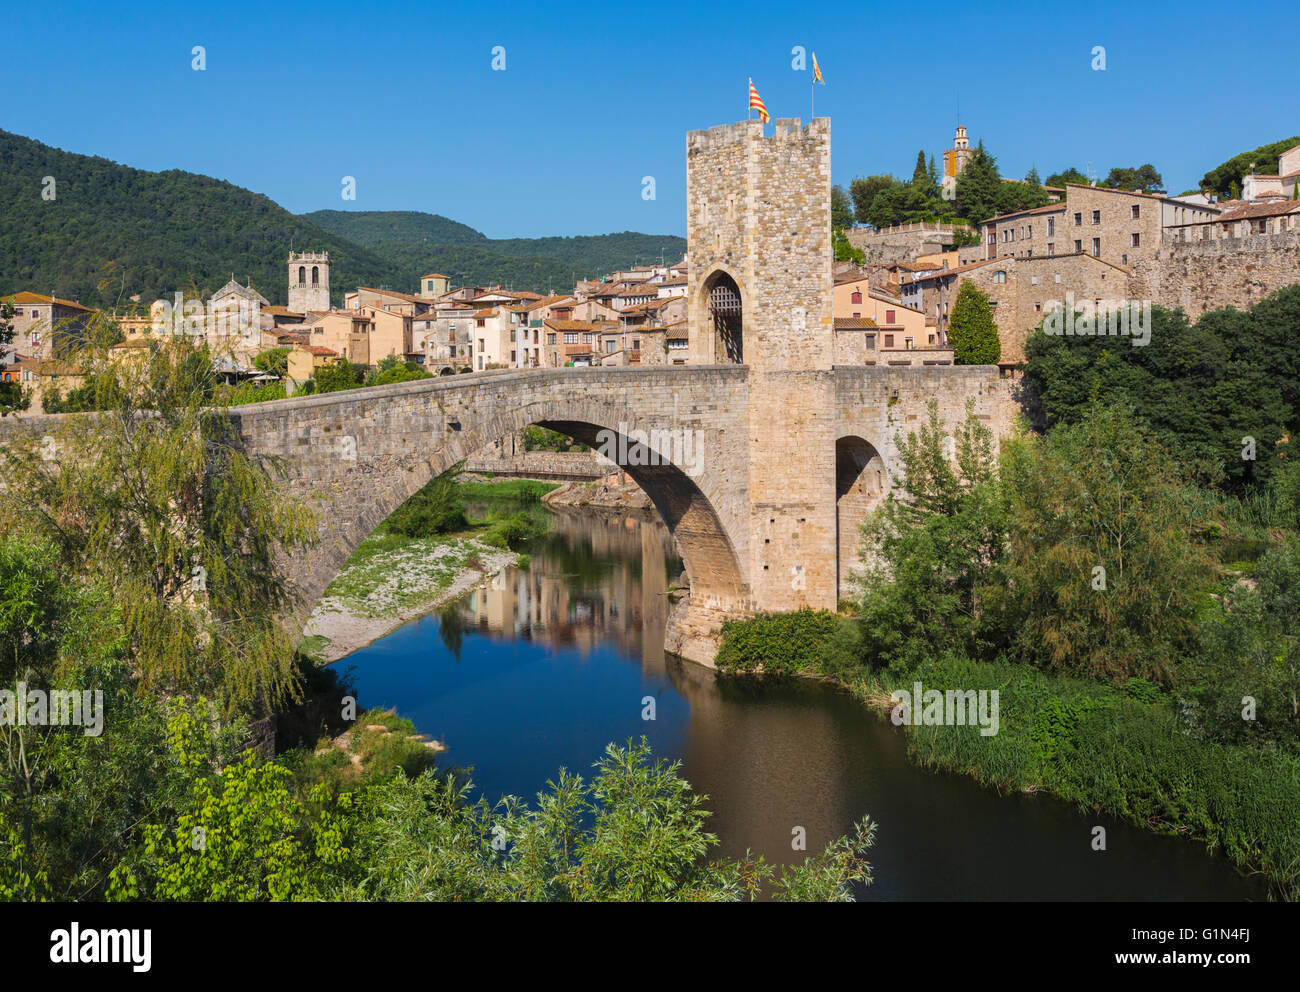 Besalu, Girona Province, Catalonia, Spain.  Fortified bridge known as El Pont Vell, the Old Bridge, crossing the Fluvia river. Stock Photo